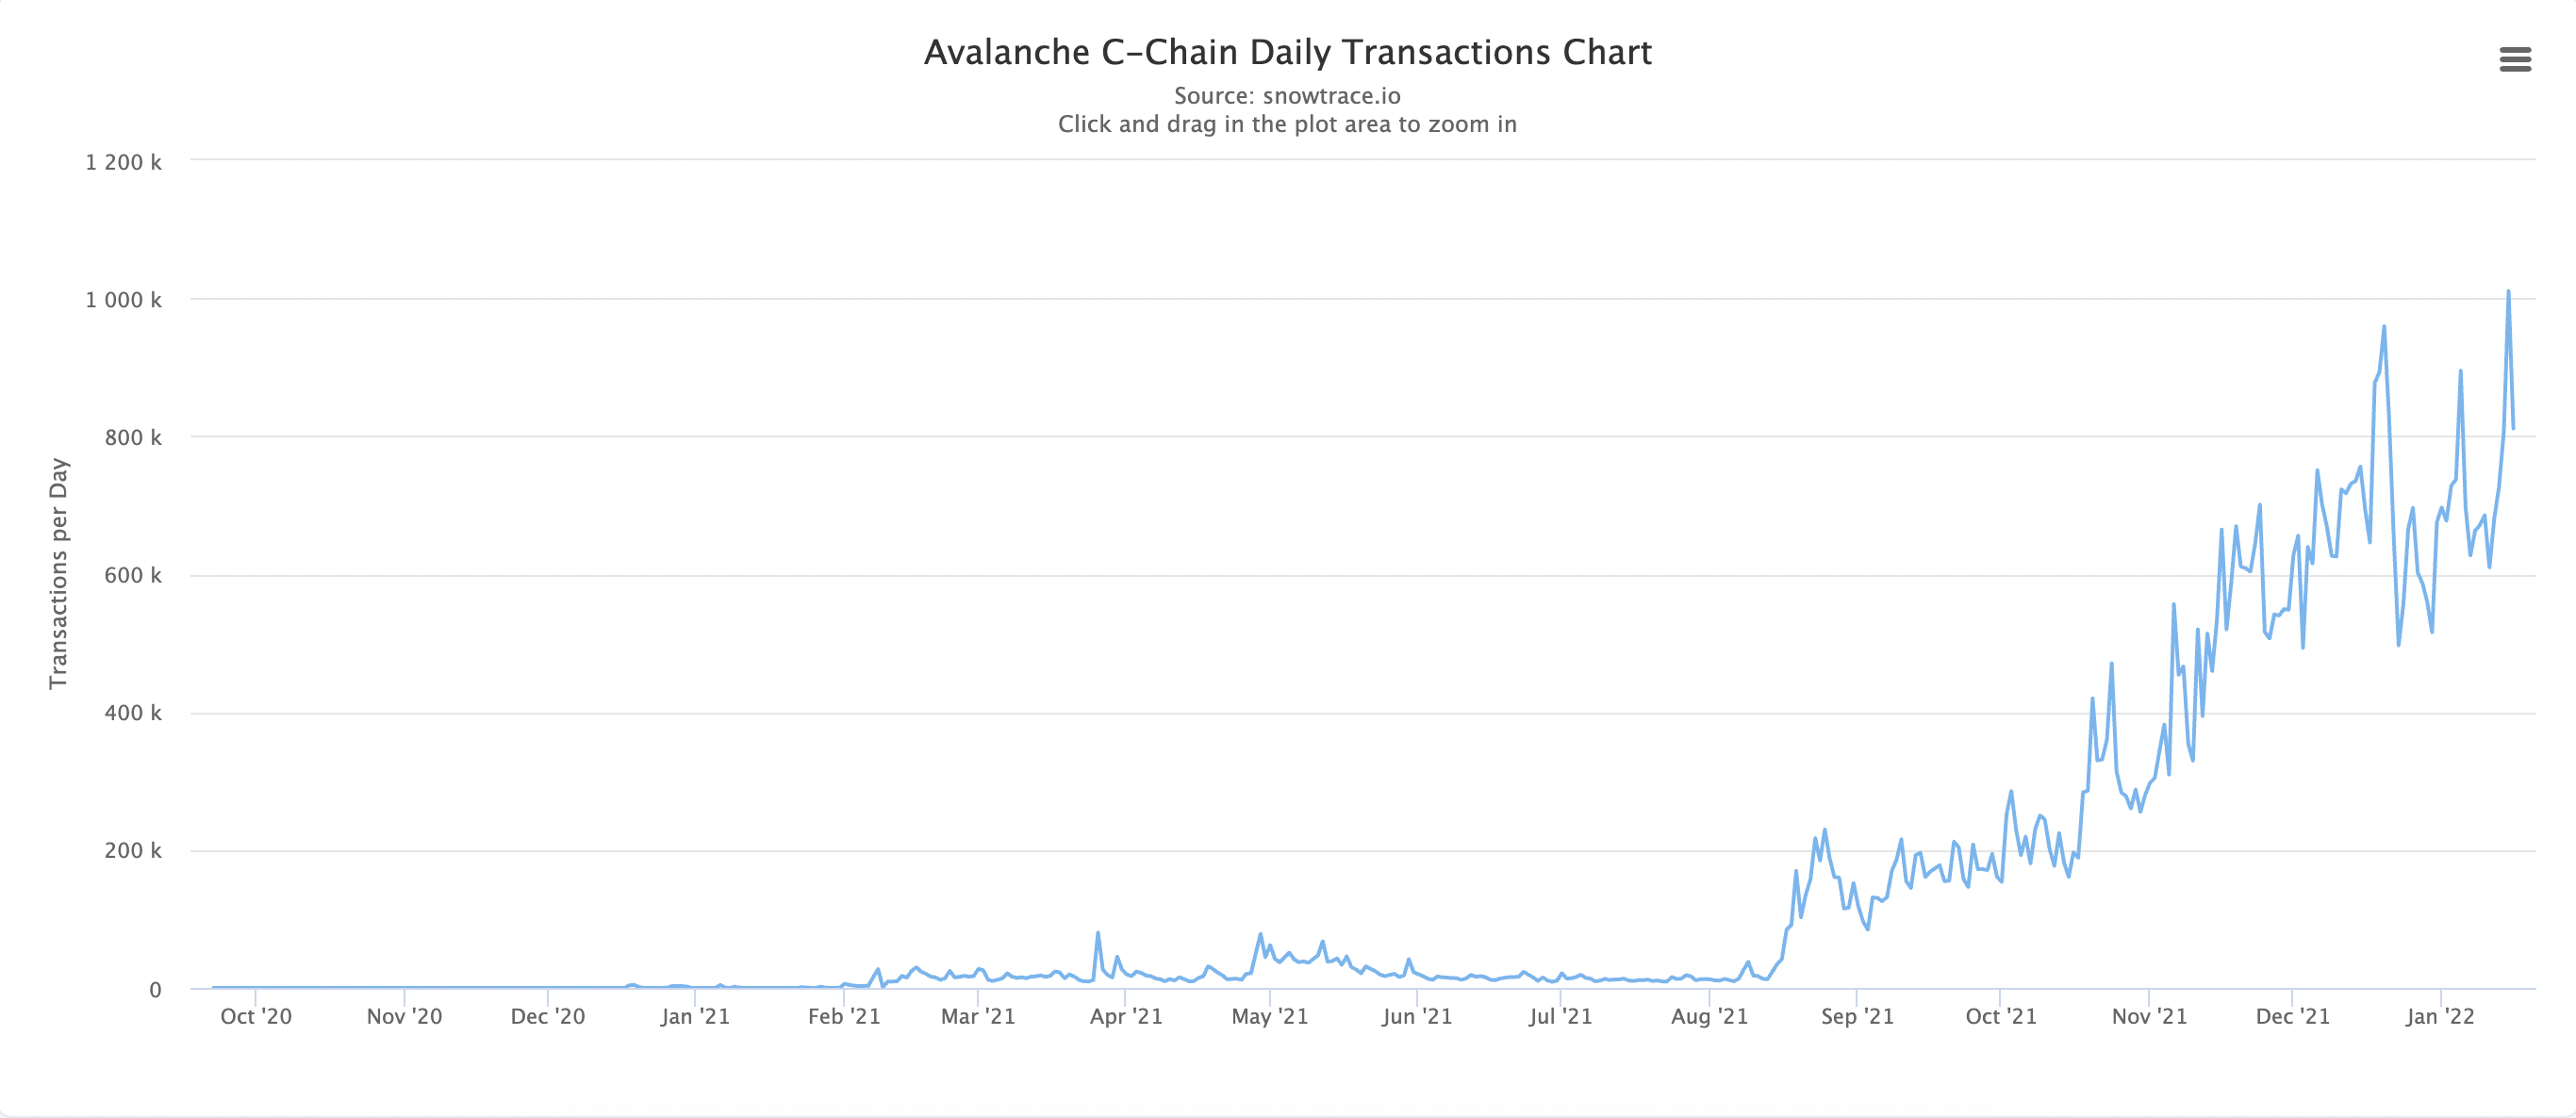 Avalanche C-Chain Daily Activity Transactions - Source, snowtrace.io